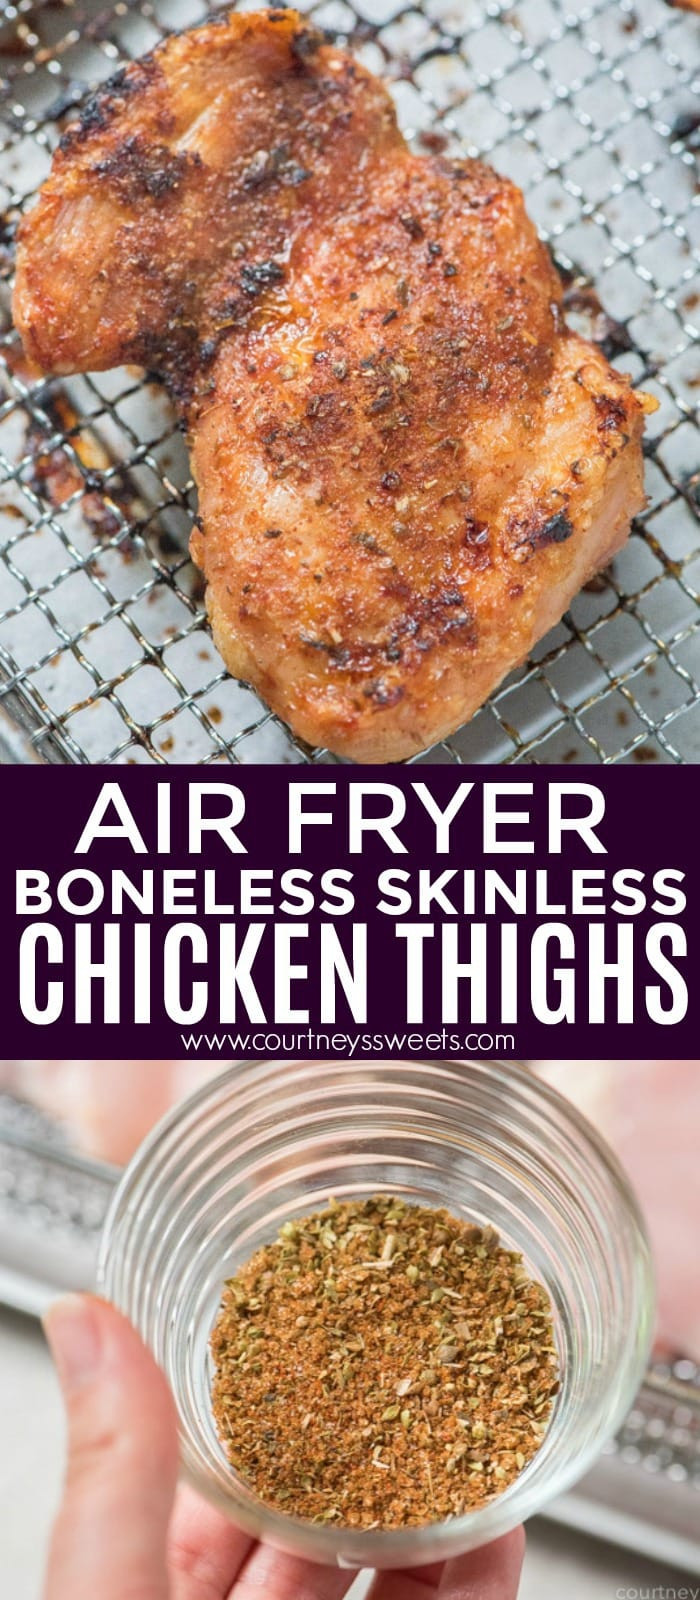 Air Fryer Fried Chicken Thighs
 Air Fryer Chicken Thighs Courtney s Sweets